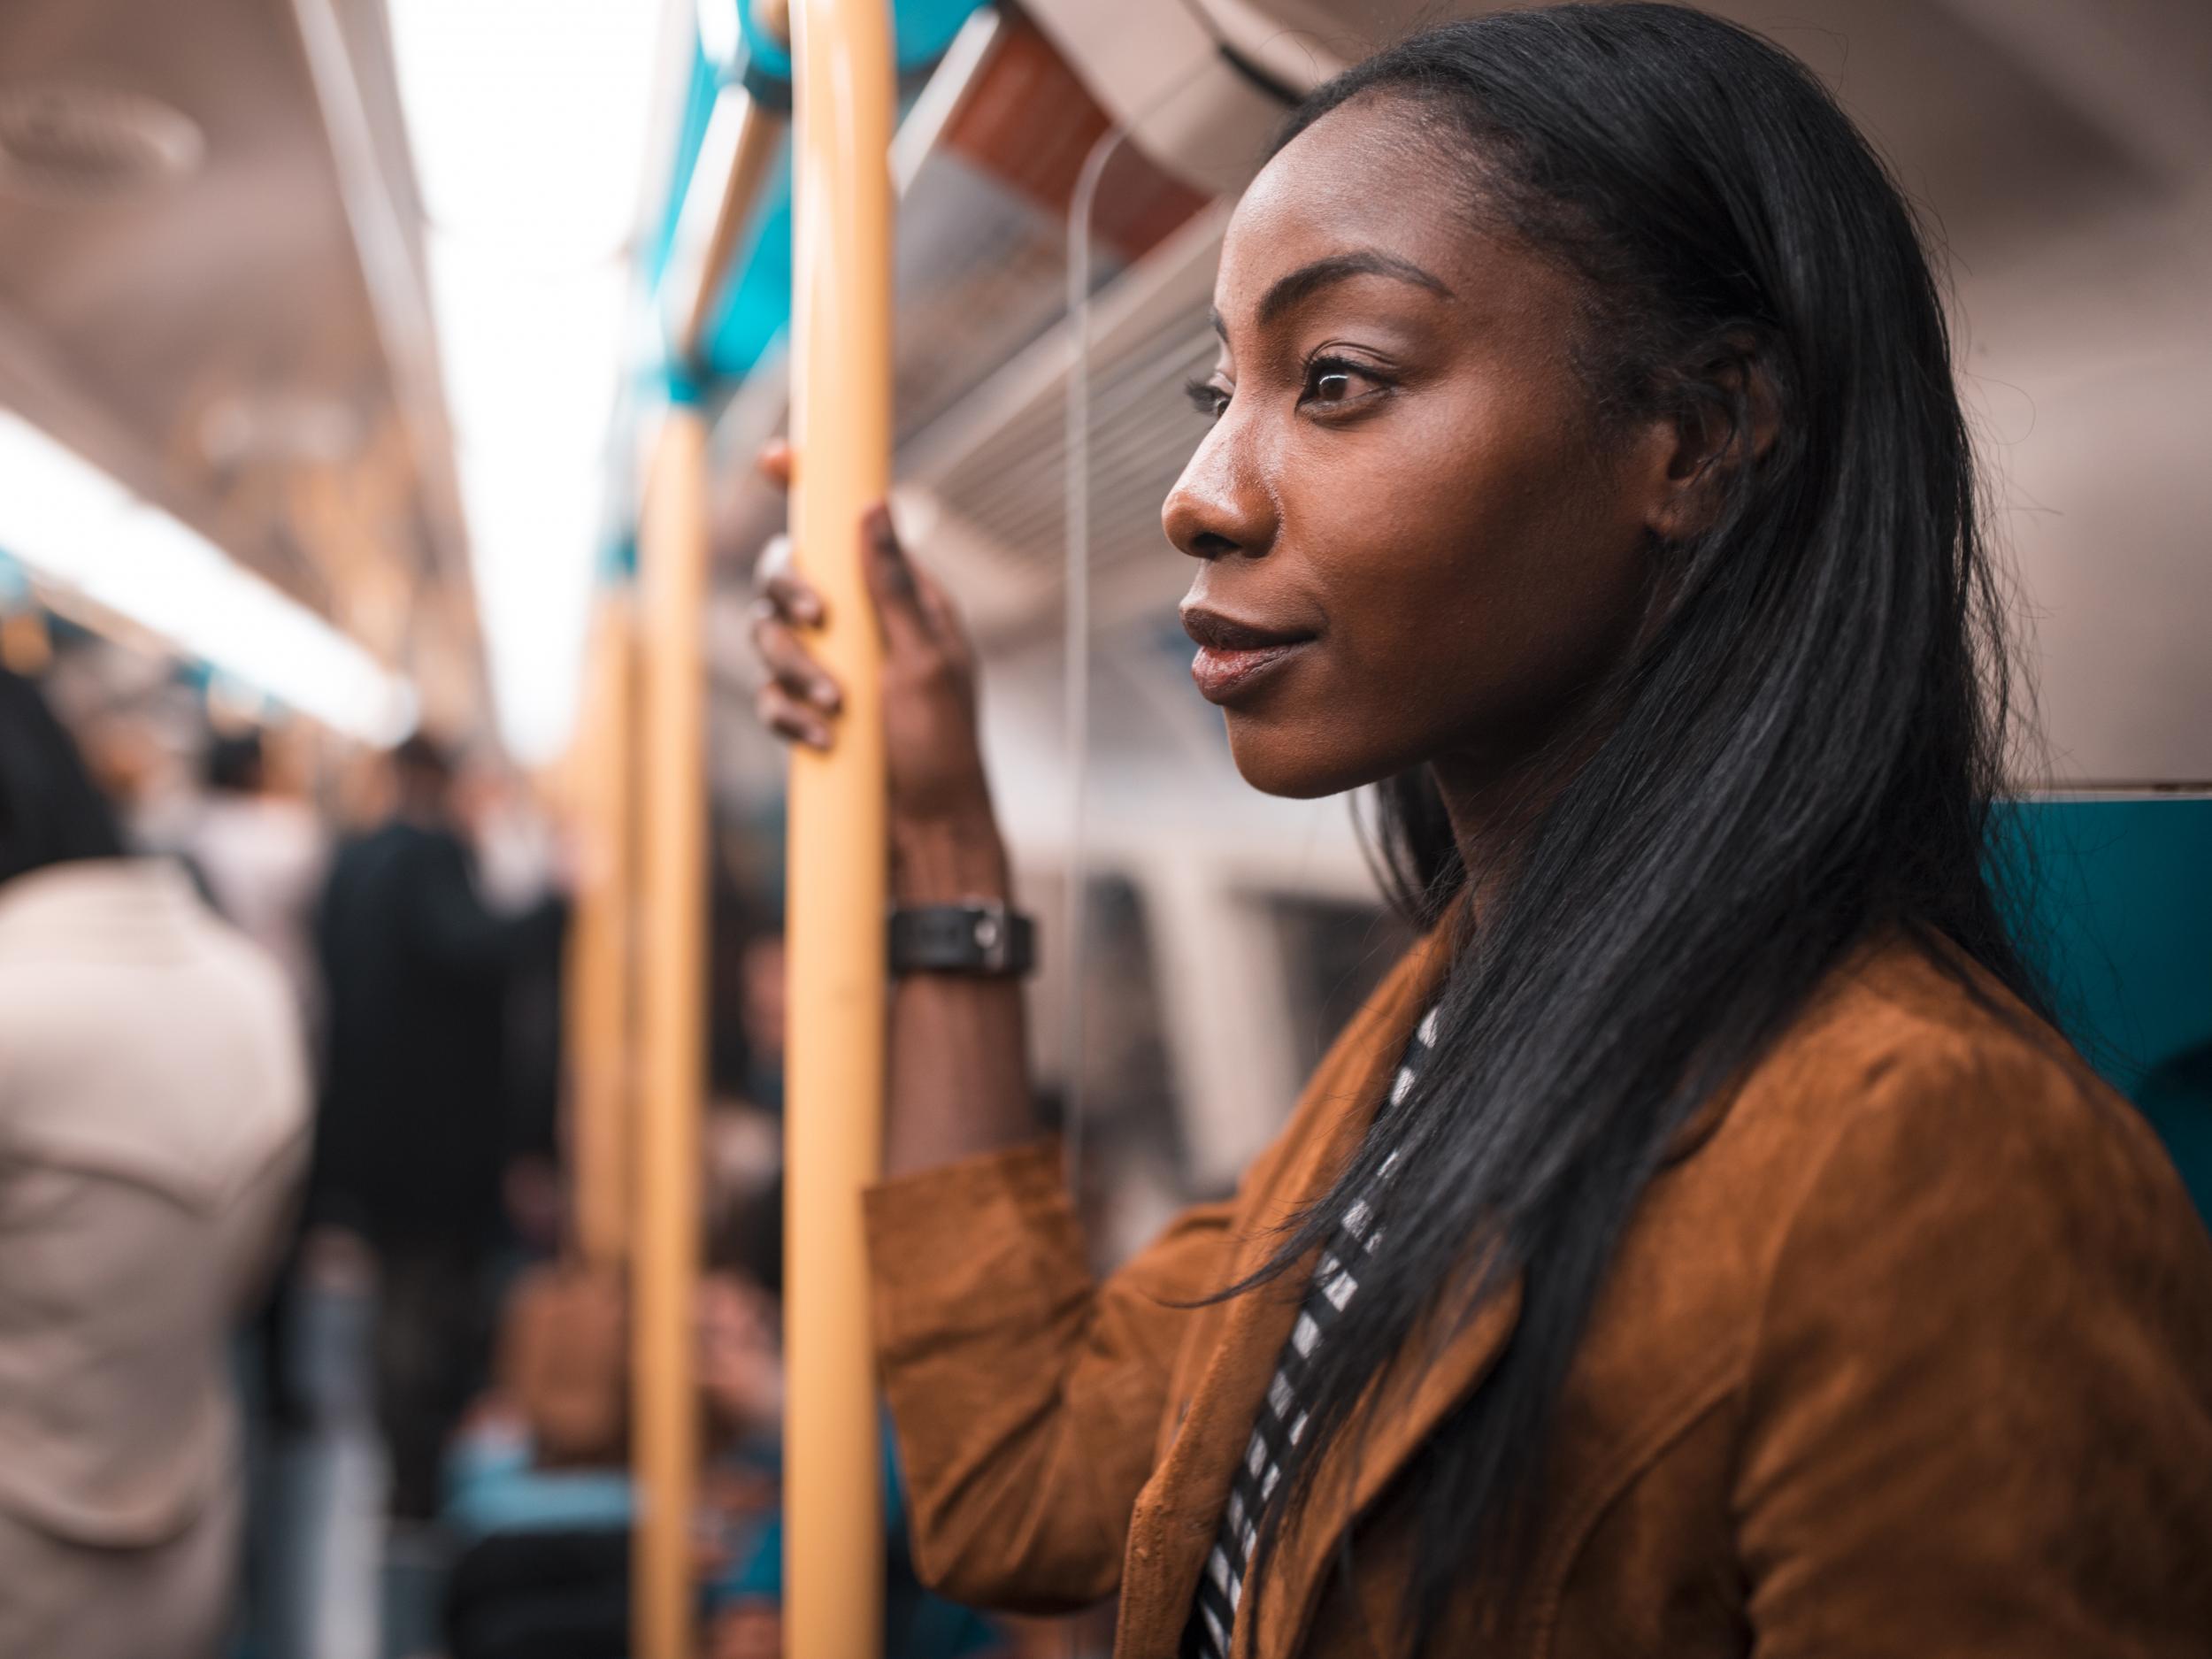 Commuters travelling on the Tube are reportedly exposed to eight times more air pollution than those who drive to work